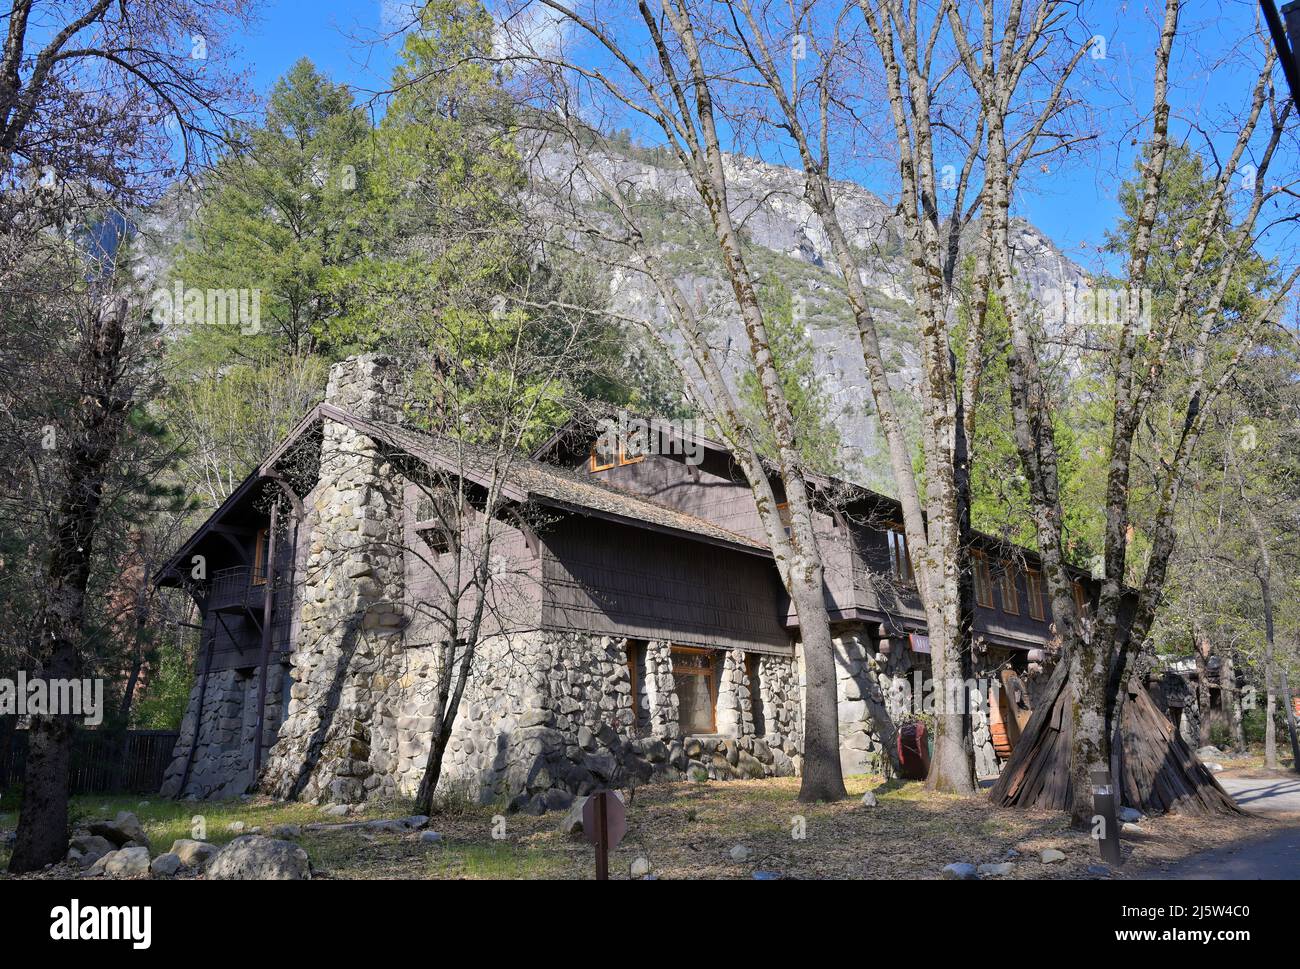 The Museum (designed by Herbert Maier) in the iconic Yosemite National Park, Mariposa CA Stock Photo